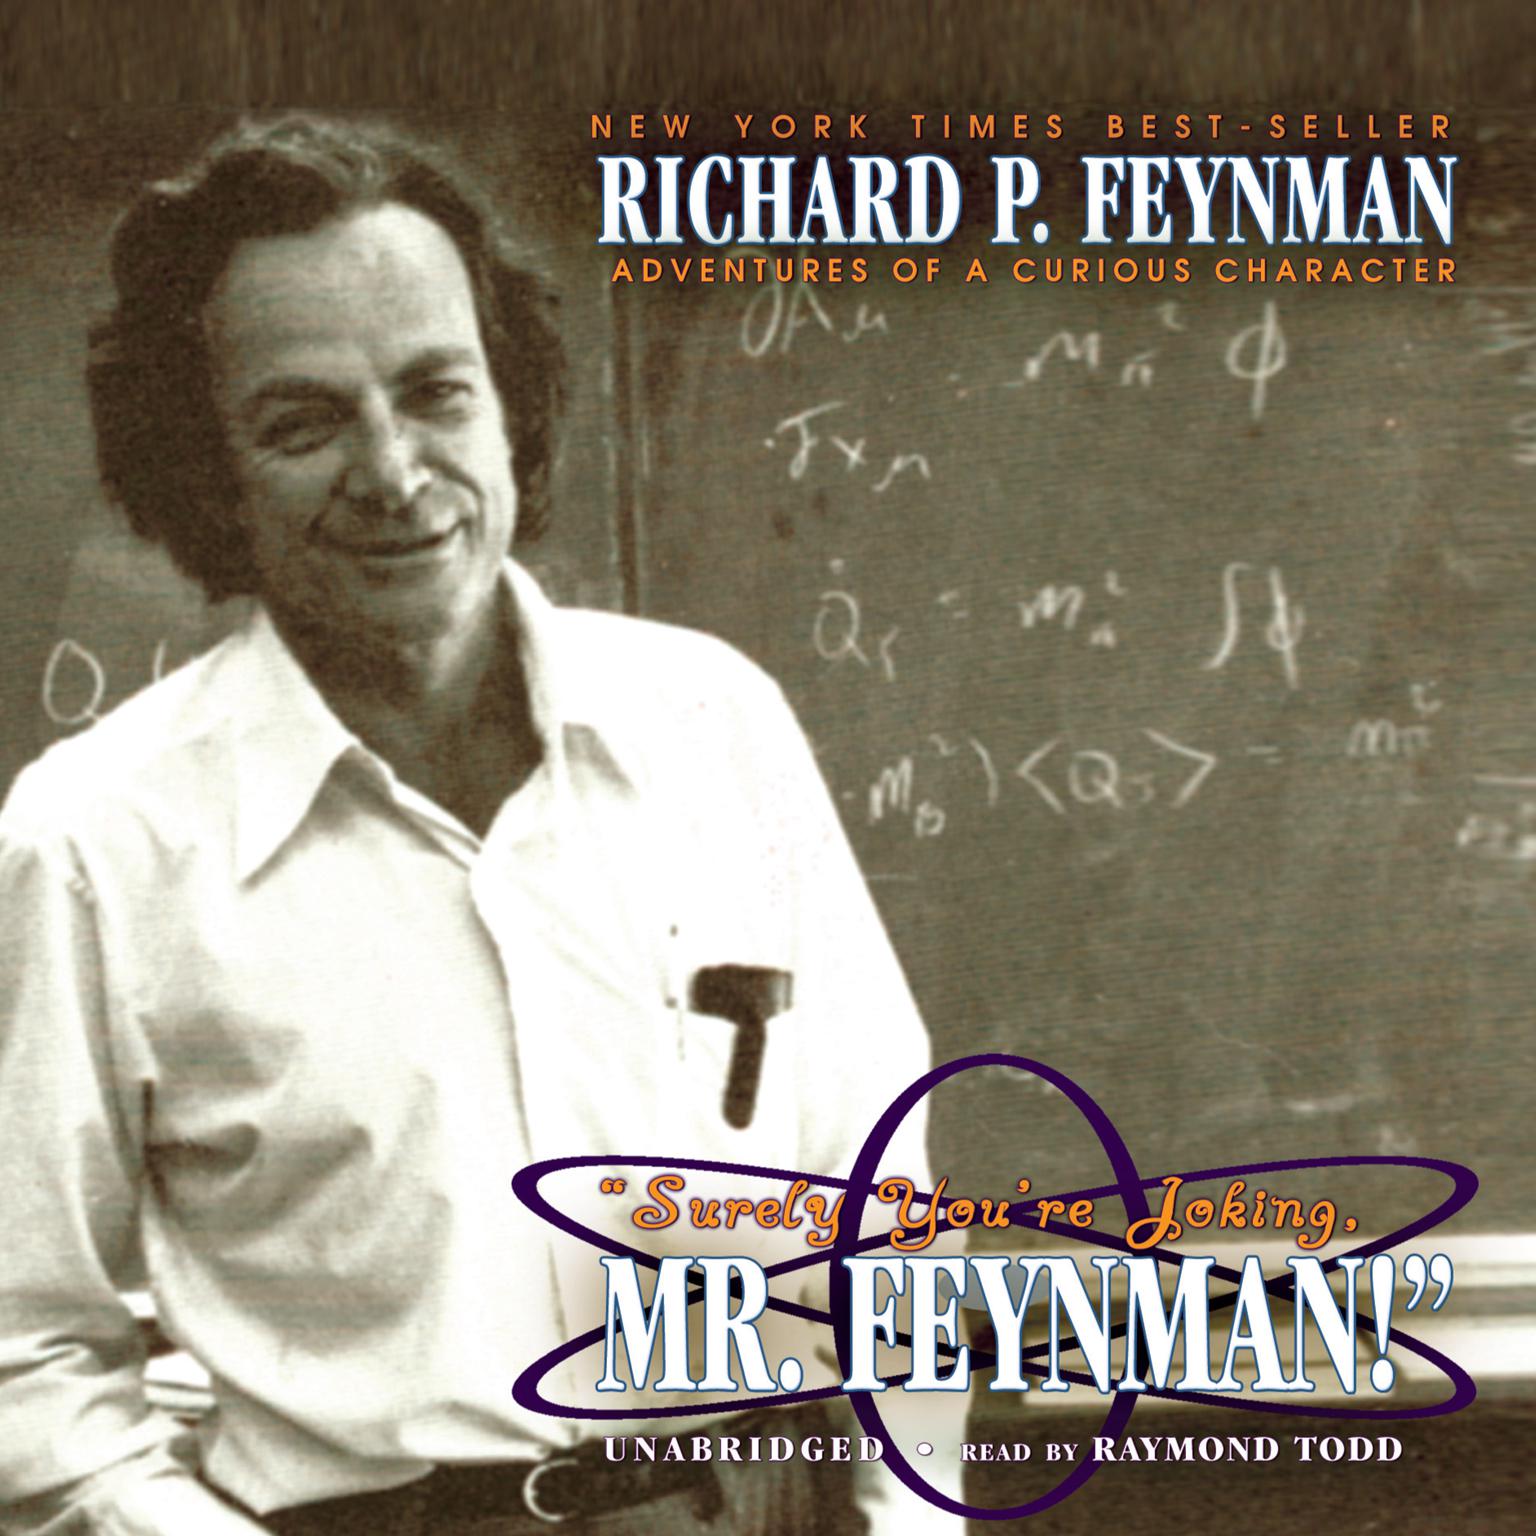 “Surely You’re Joking, Mr. Feynman!”: Adventures of a Curious Character Audiobook, by Richard P. Feynman